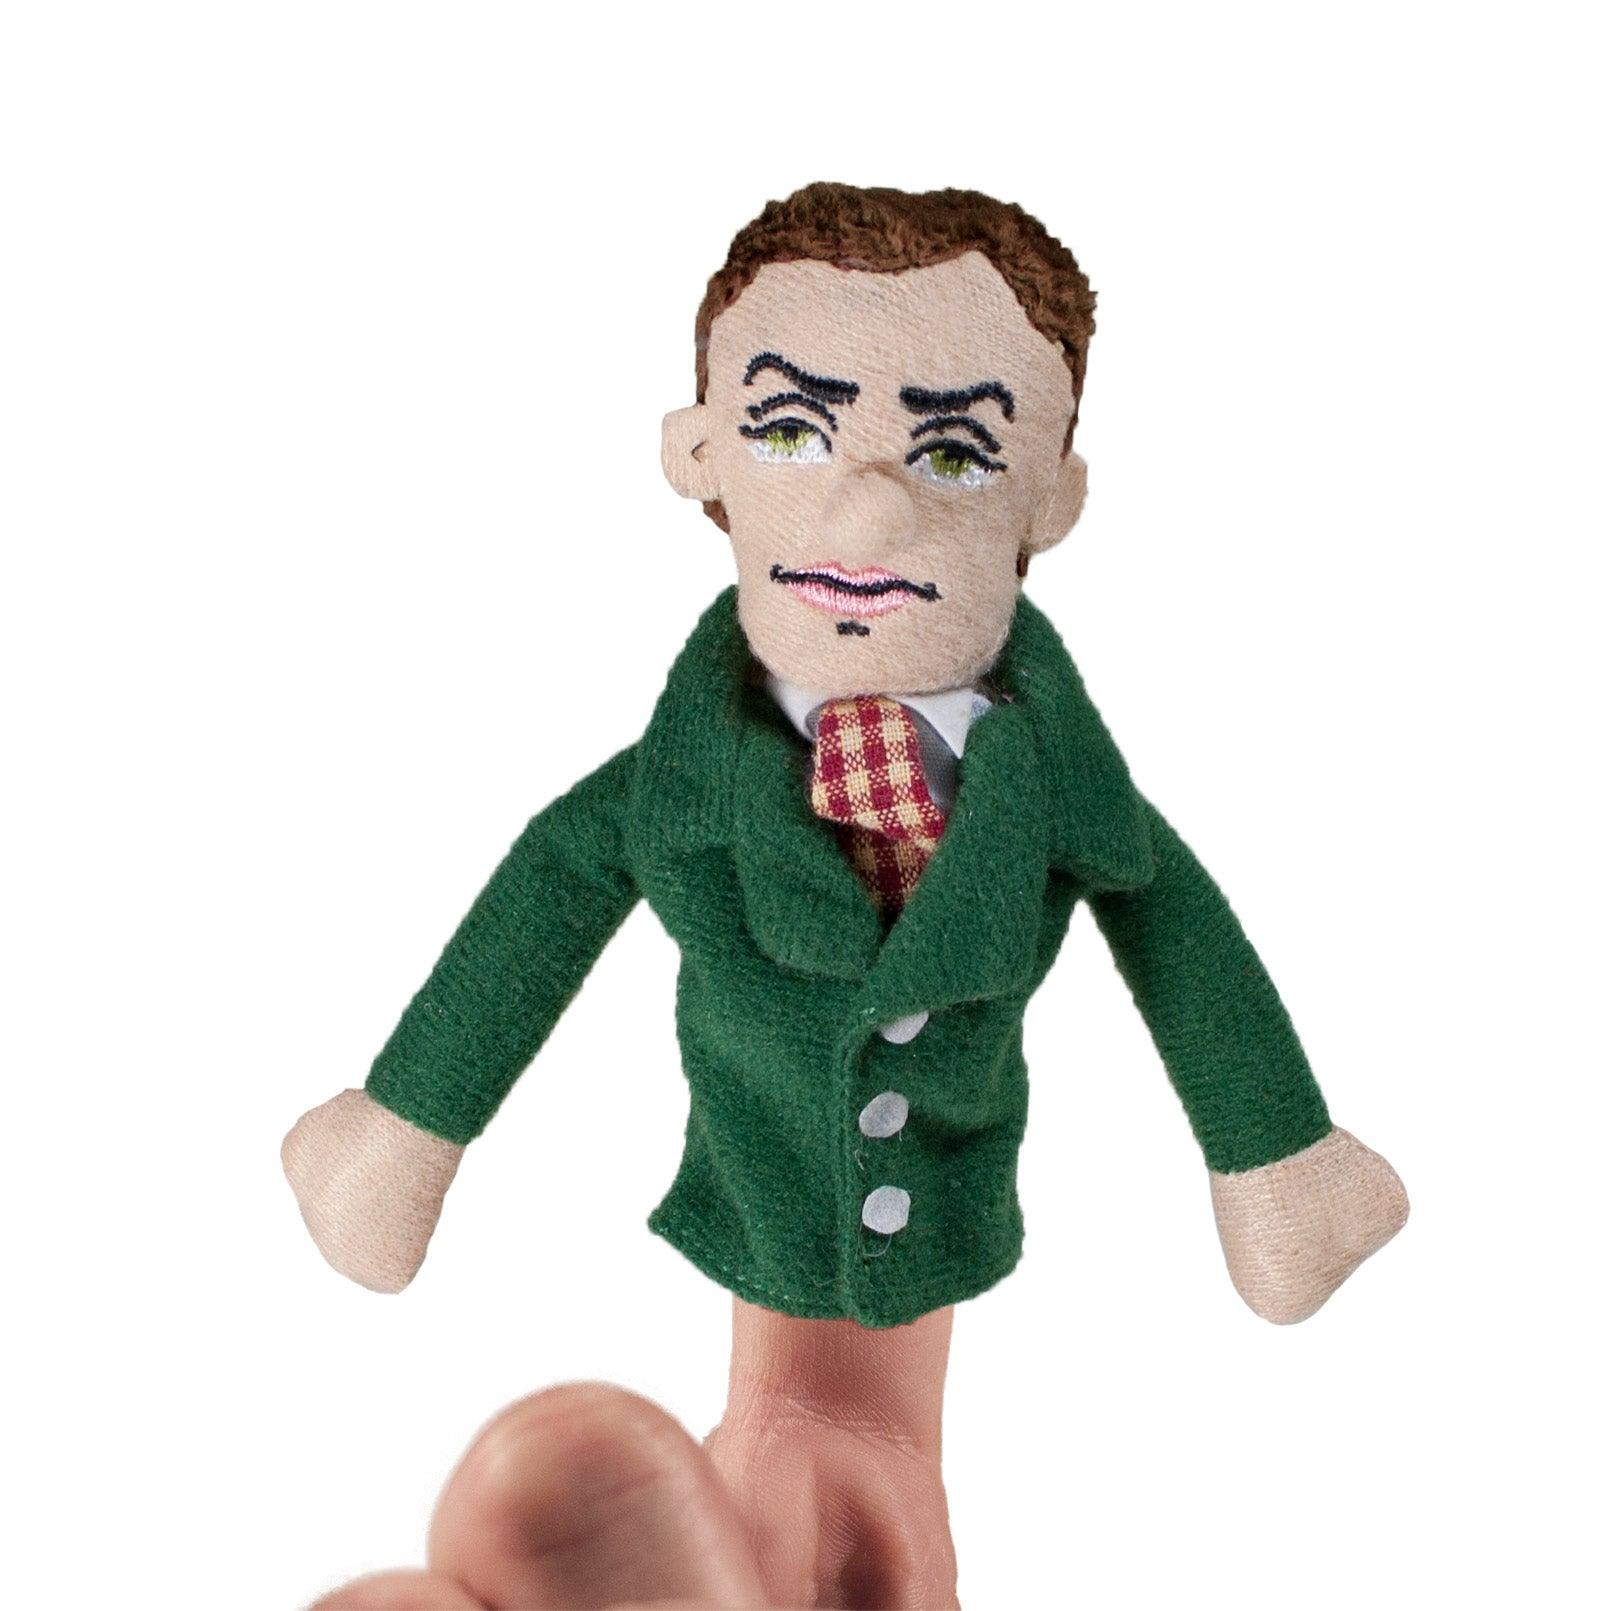 Product photo of Alan Turing Finger Puppet, a novelty gift manufactured by The Unemployed Philosophers Guild.